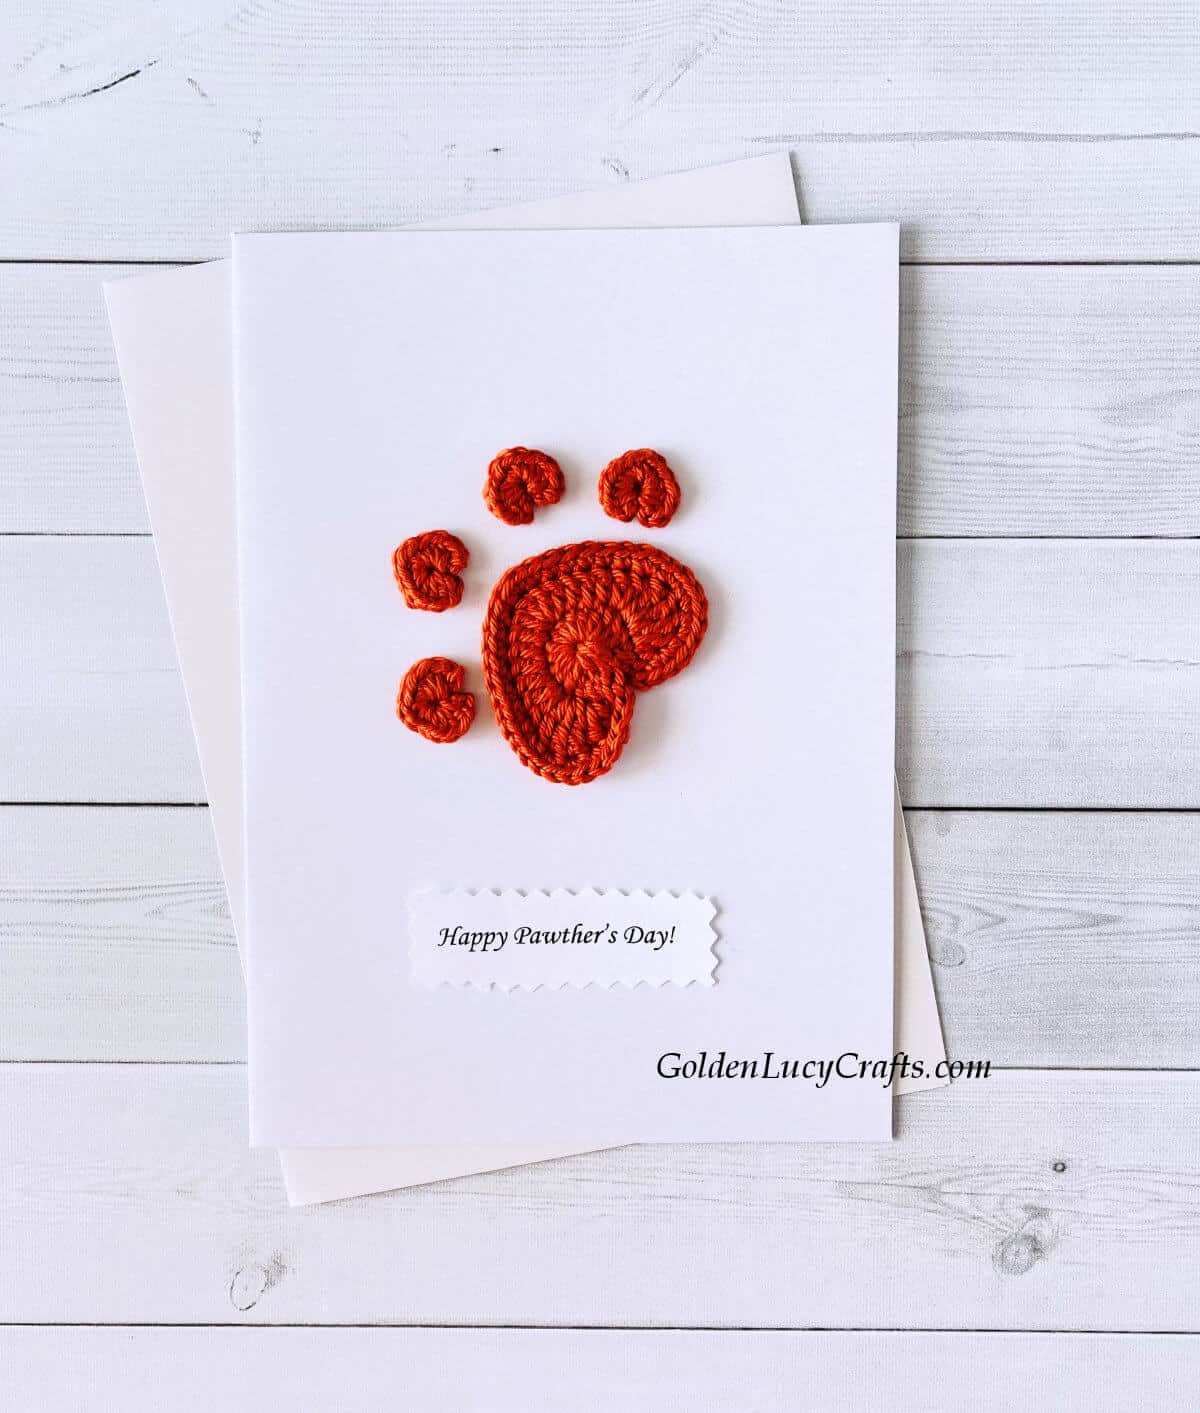 Crochet paw print applique on a white card with the text "Happy pawther's day!"